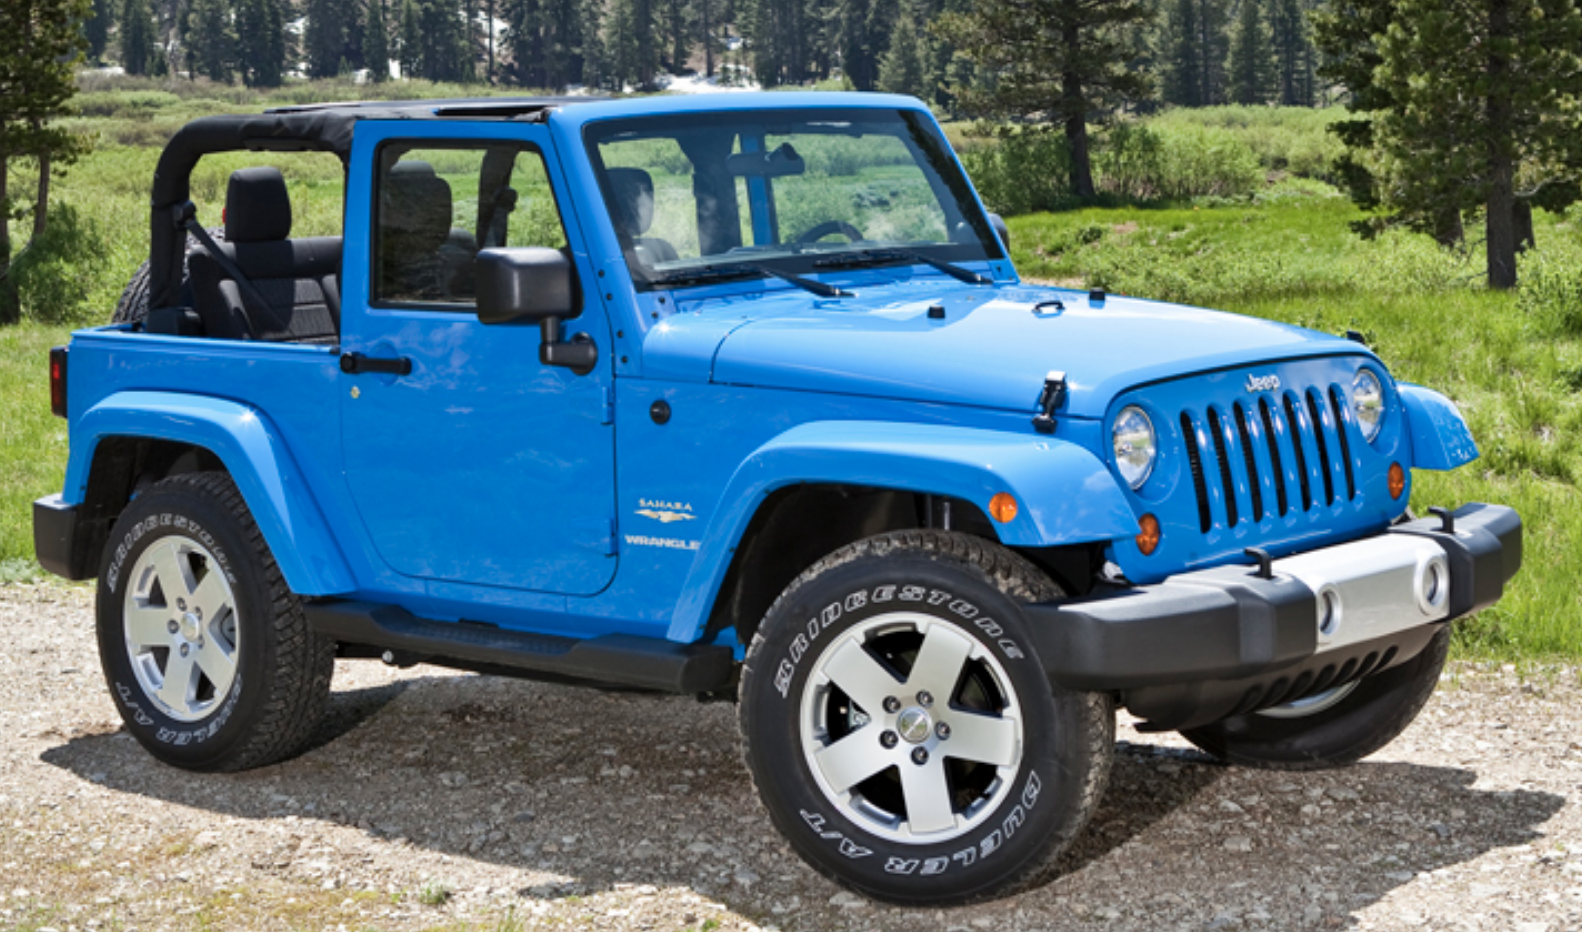 Quick Look: 2013 Jeep Wranger | The Daily Drive | Consumer Guide® The Daily  Drive | Consumer Guide®